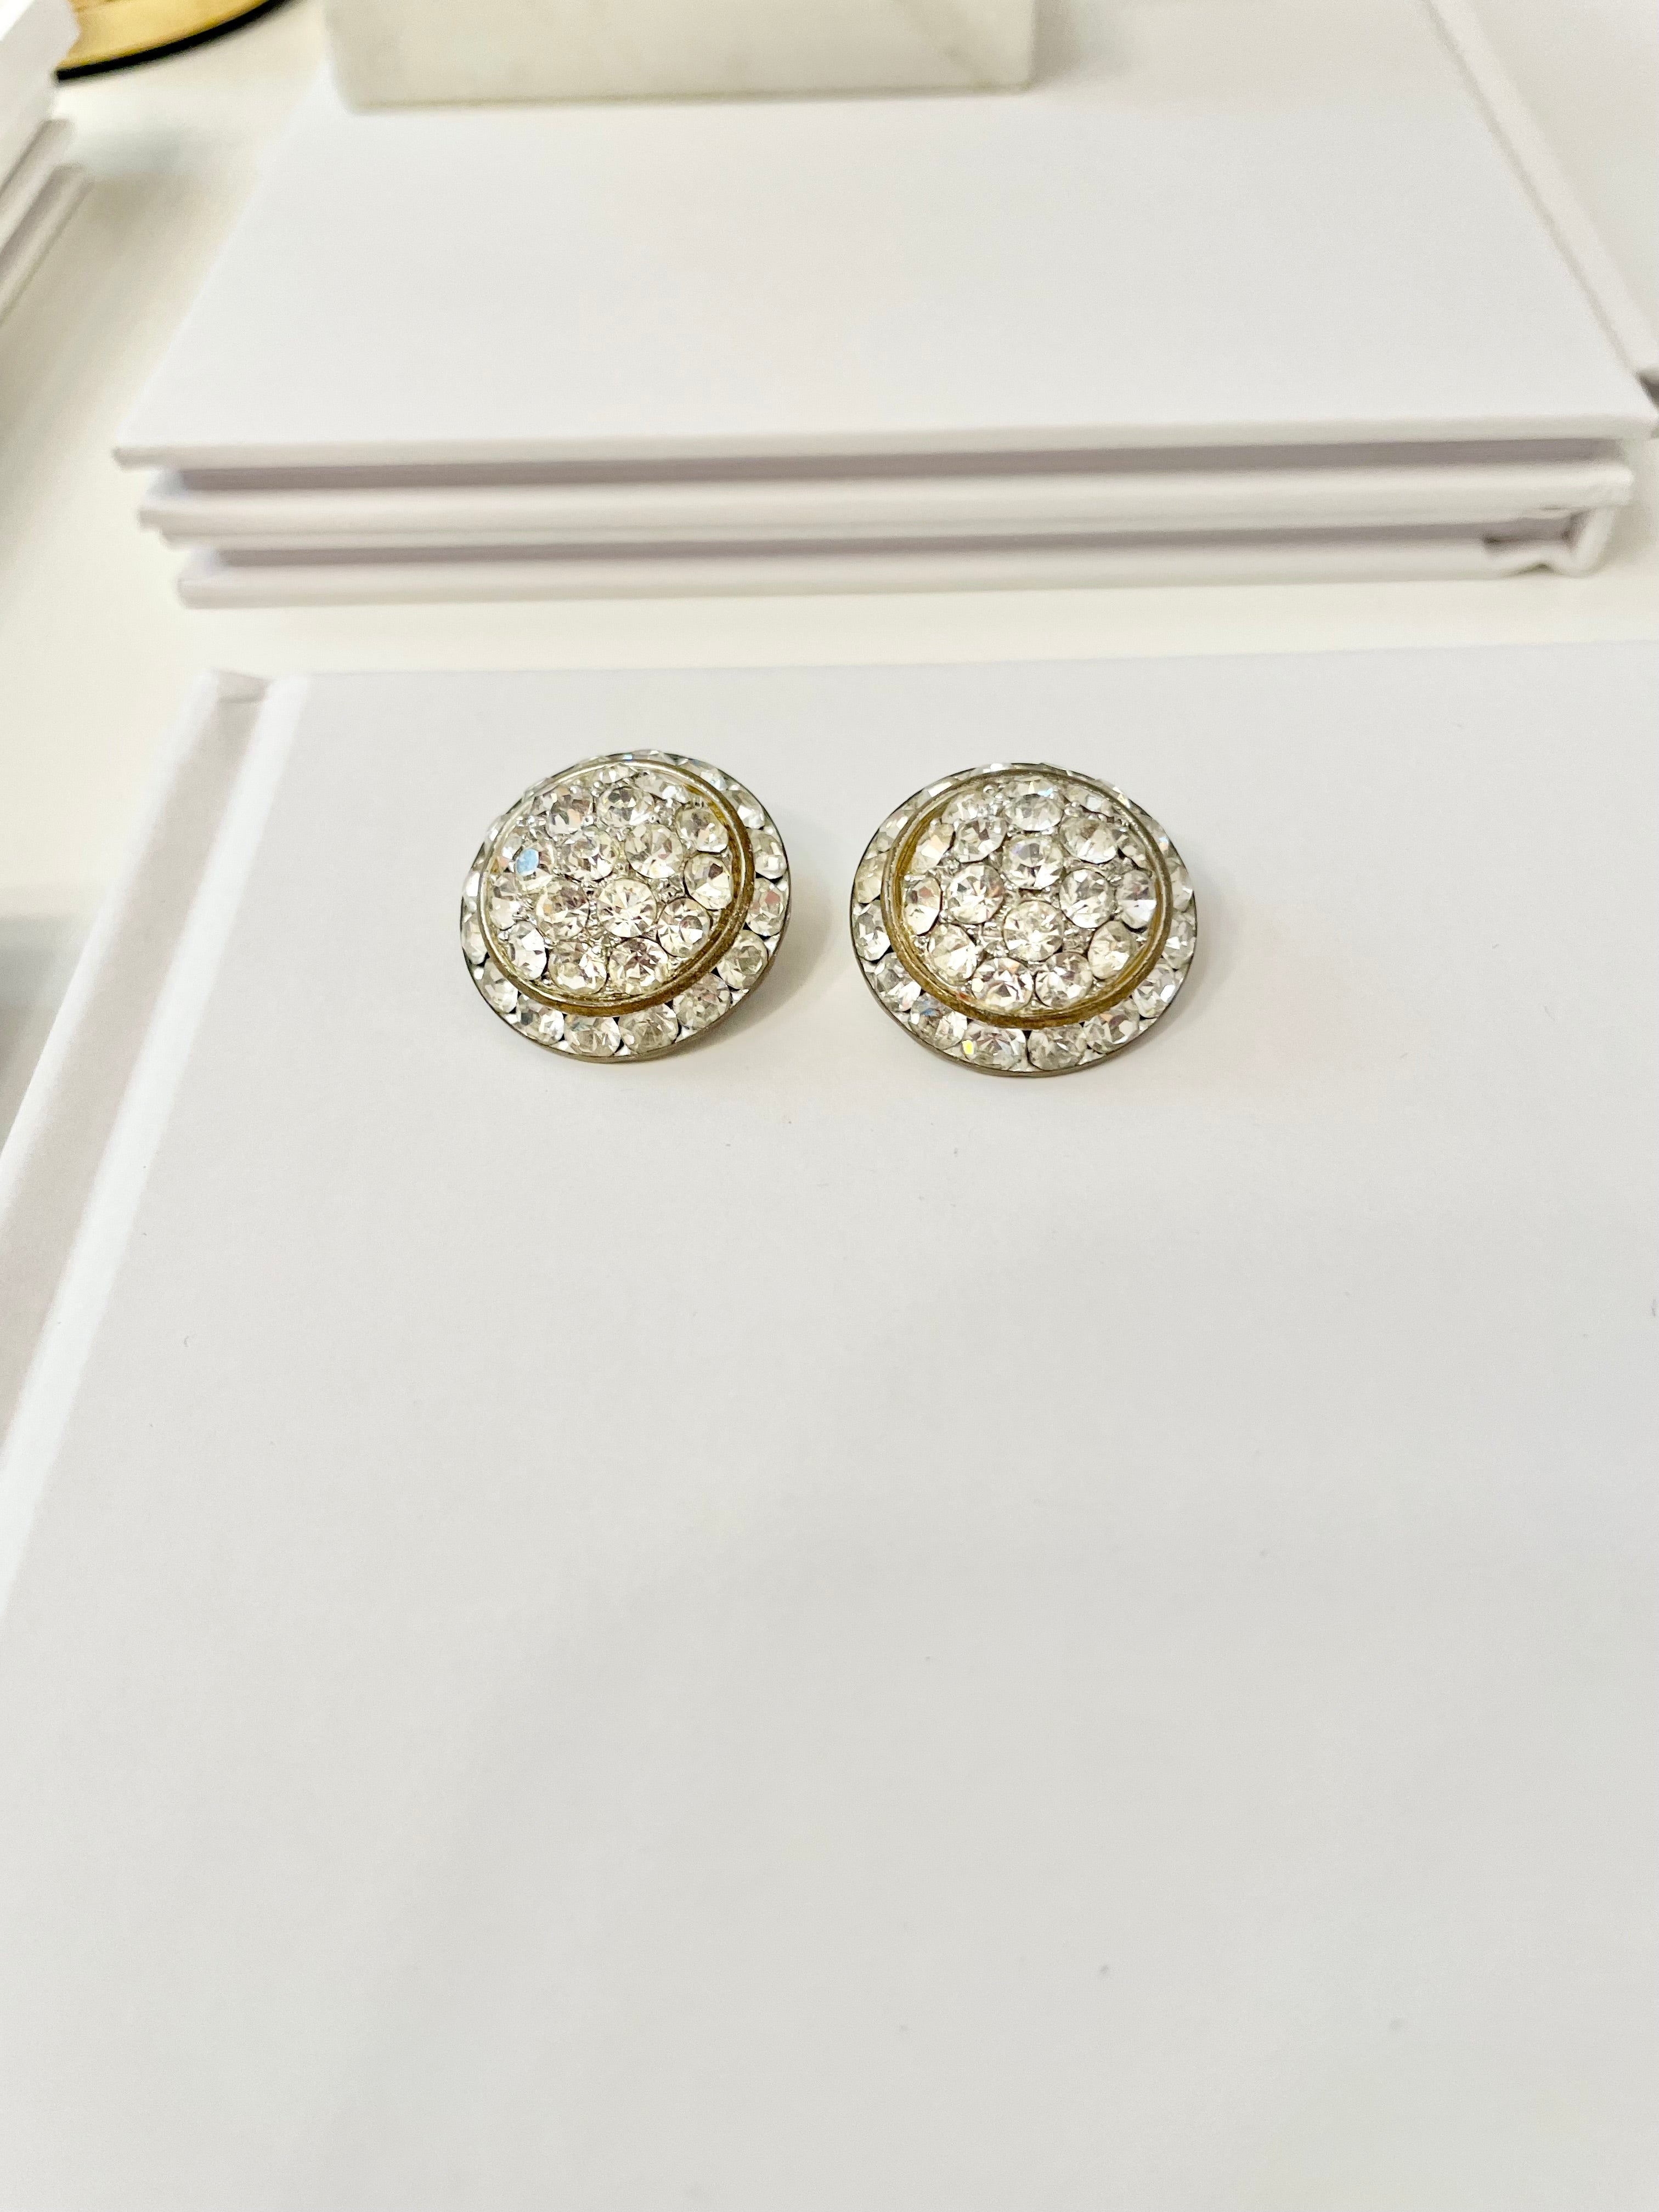 These splendid sparkly 1960's button earrings are truly divine! So perfect..